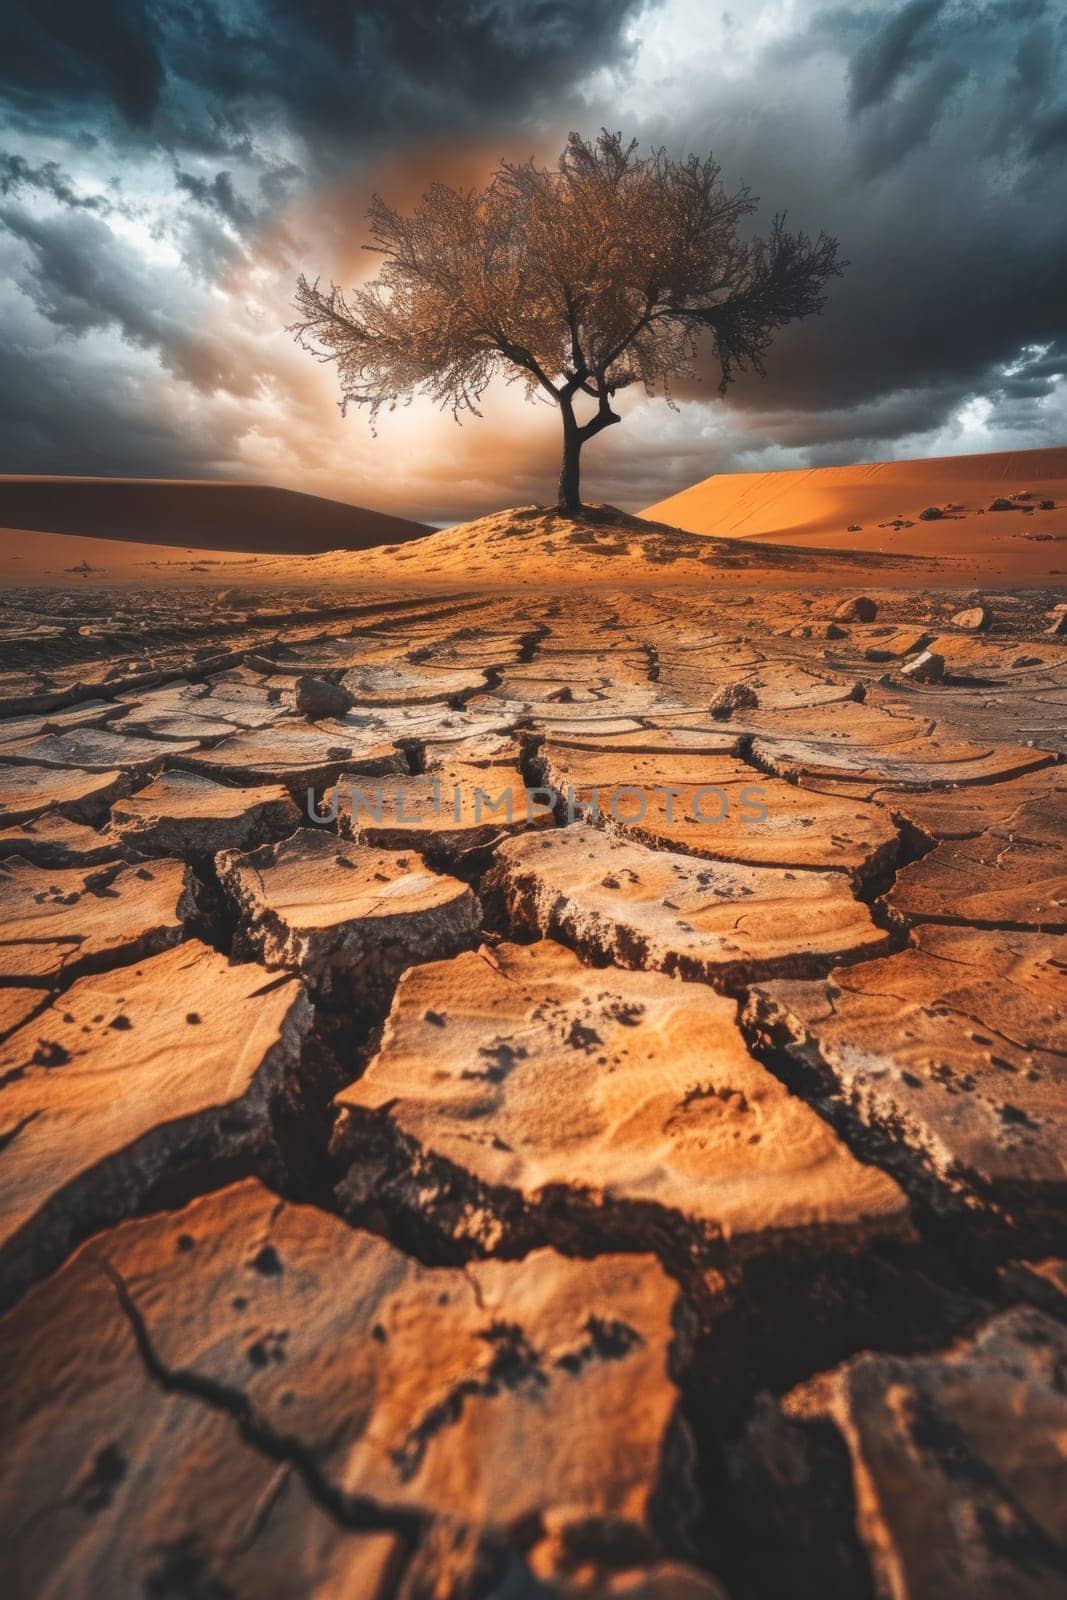 Lone tree in desert landscape with stormy sky, symbolizing resilience and strength in nature